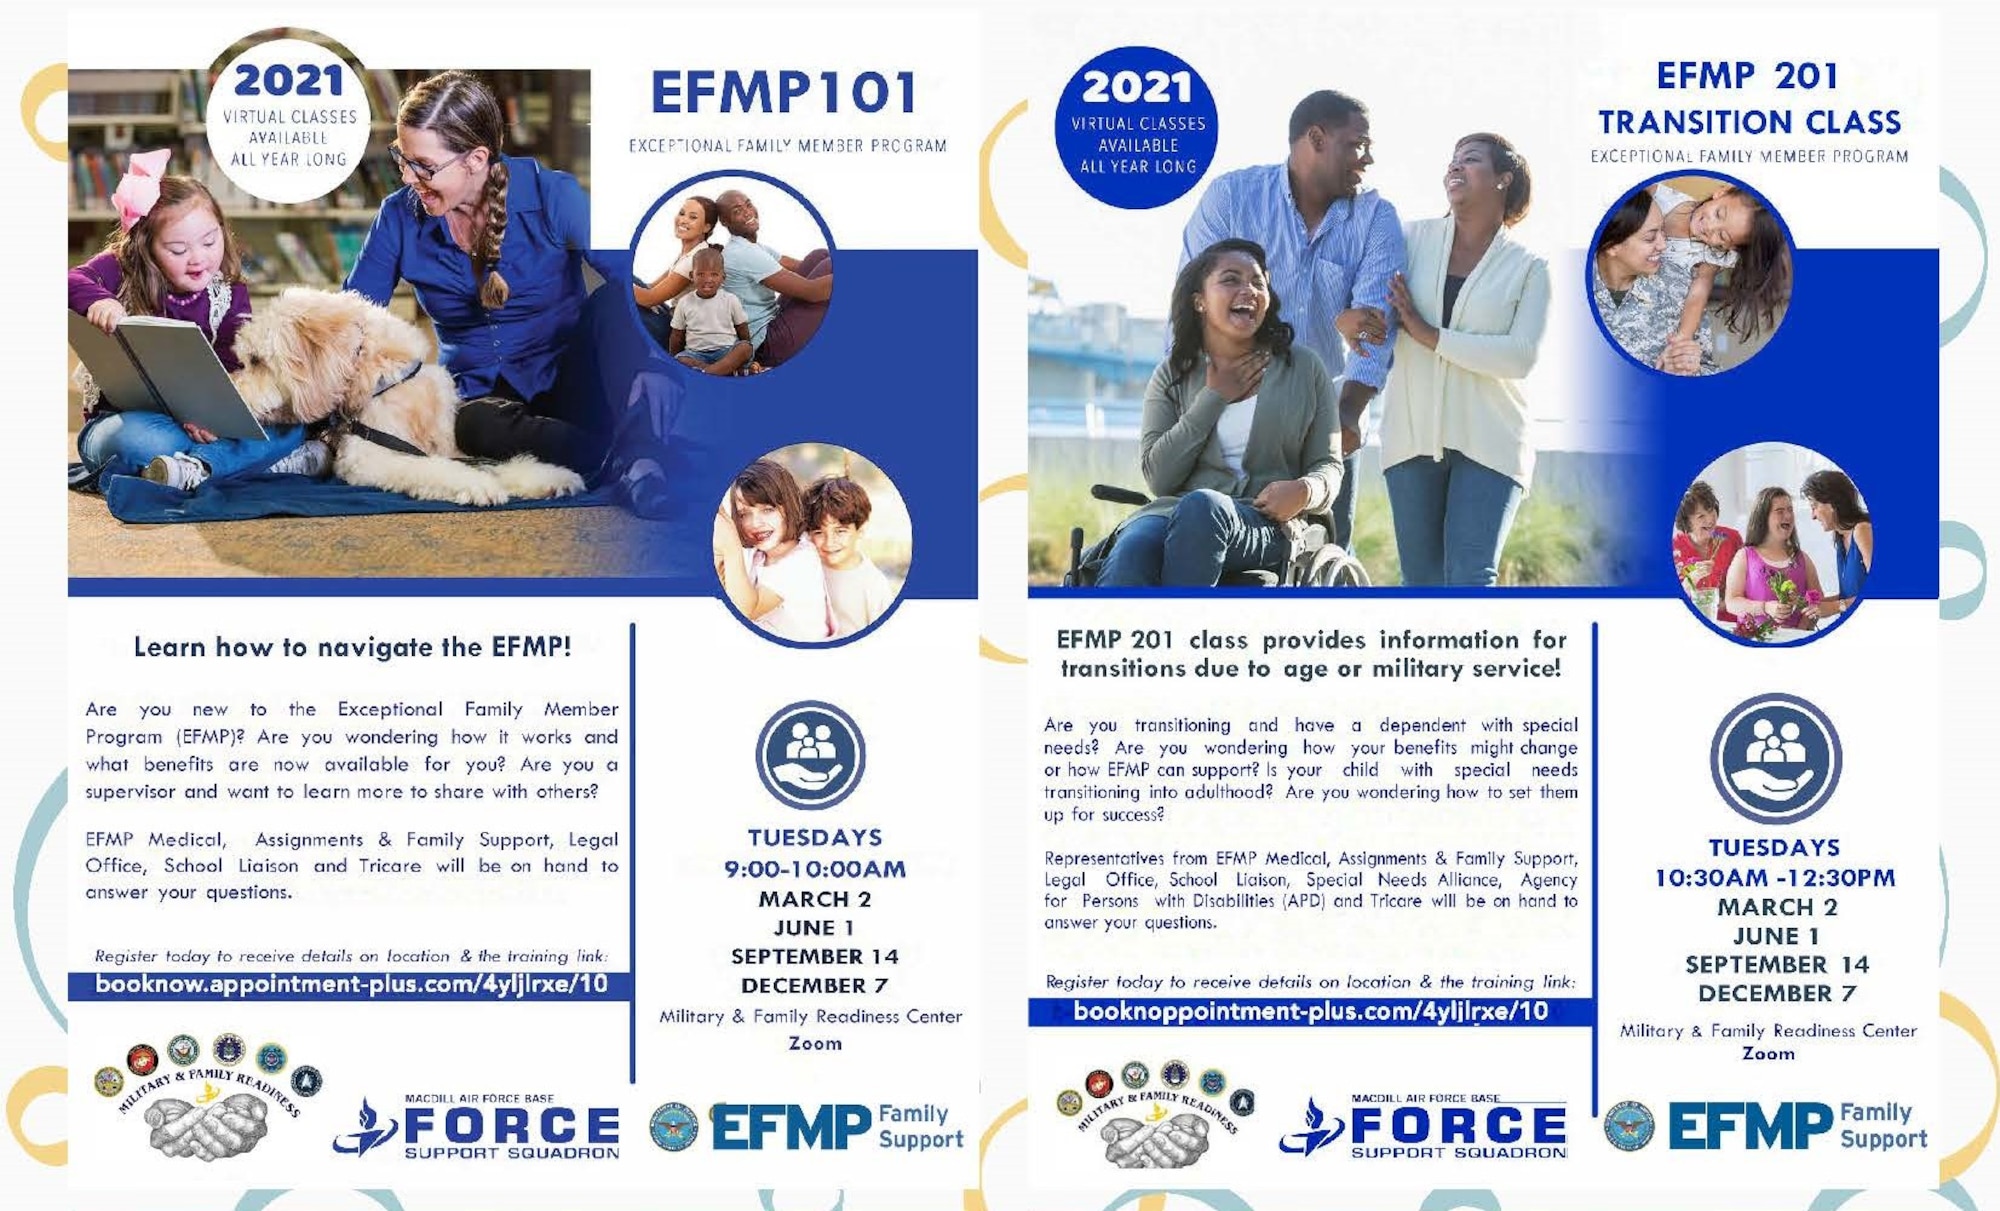 The Exceptional Family Member Program (EFMP) at MacDill Air Force Base, Fla., services more than 1,000 families.